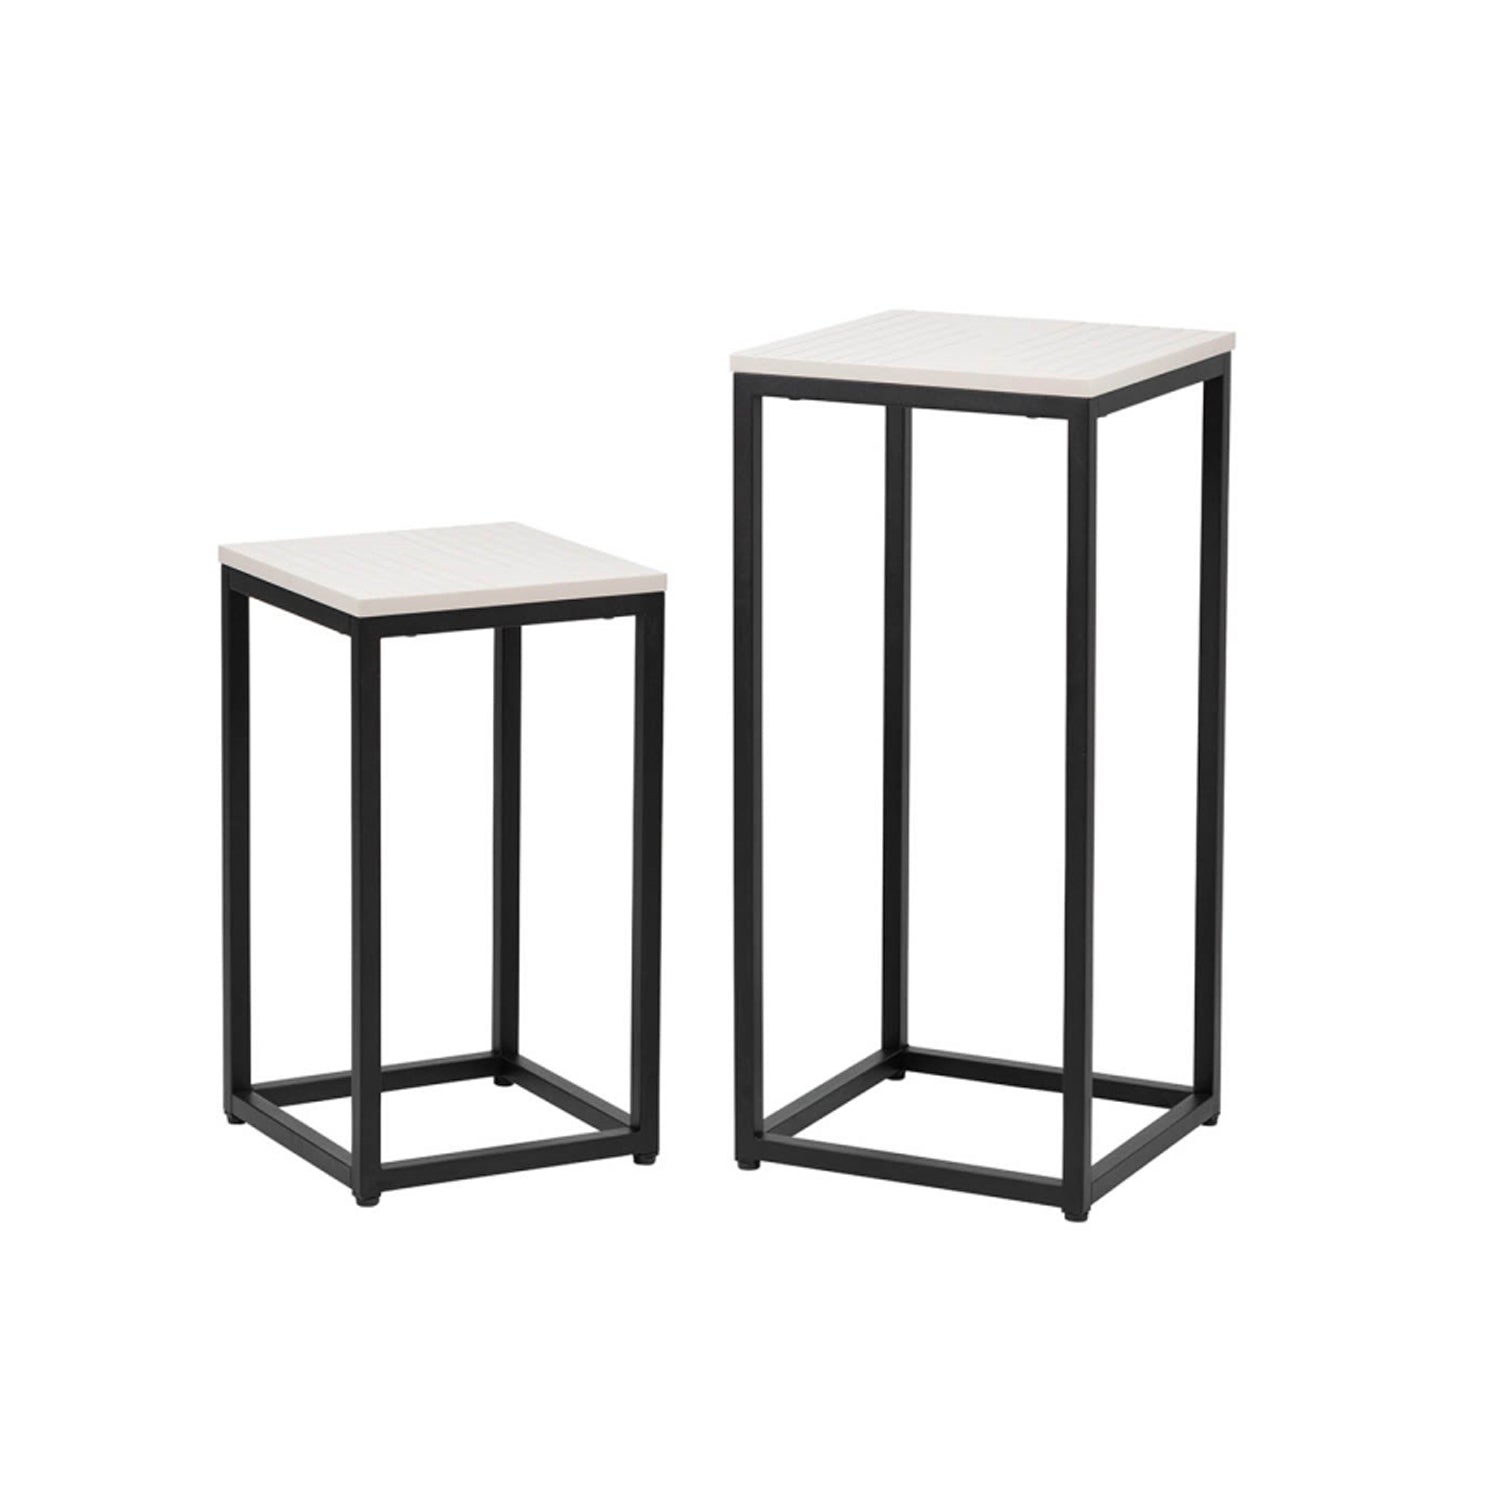 Set of 2 Grey Plant Stand